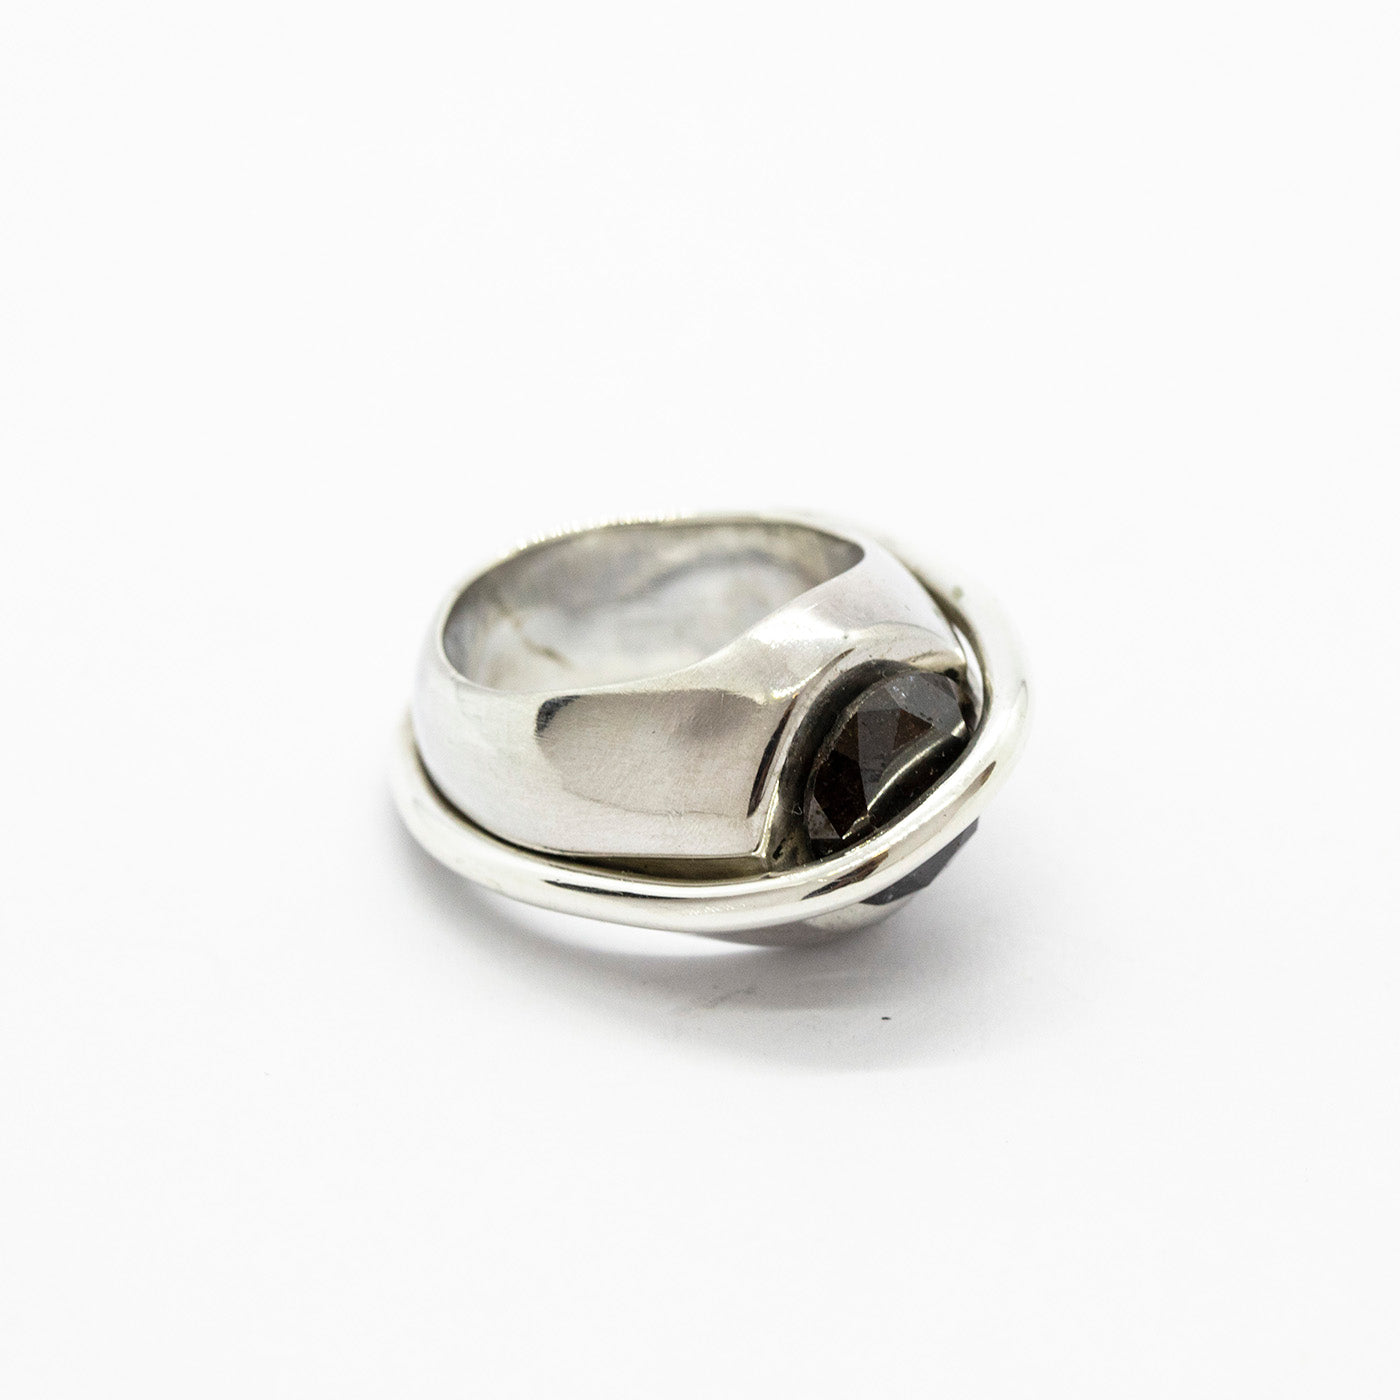 Chaotic Signet ring front view silver 3,47ct deep mahogany diamond innan jewellery independent atelier berlin